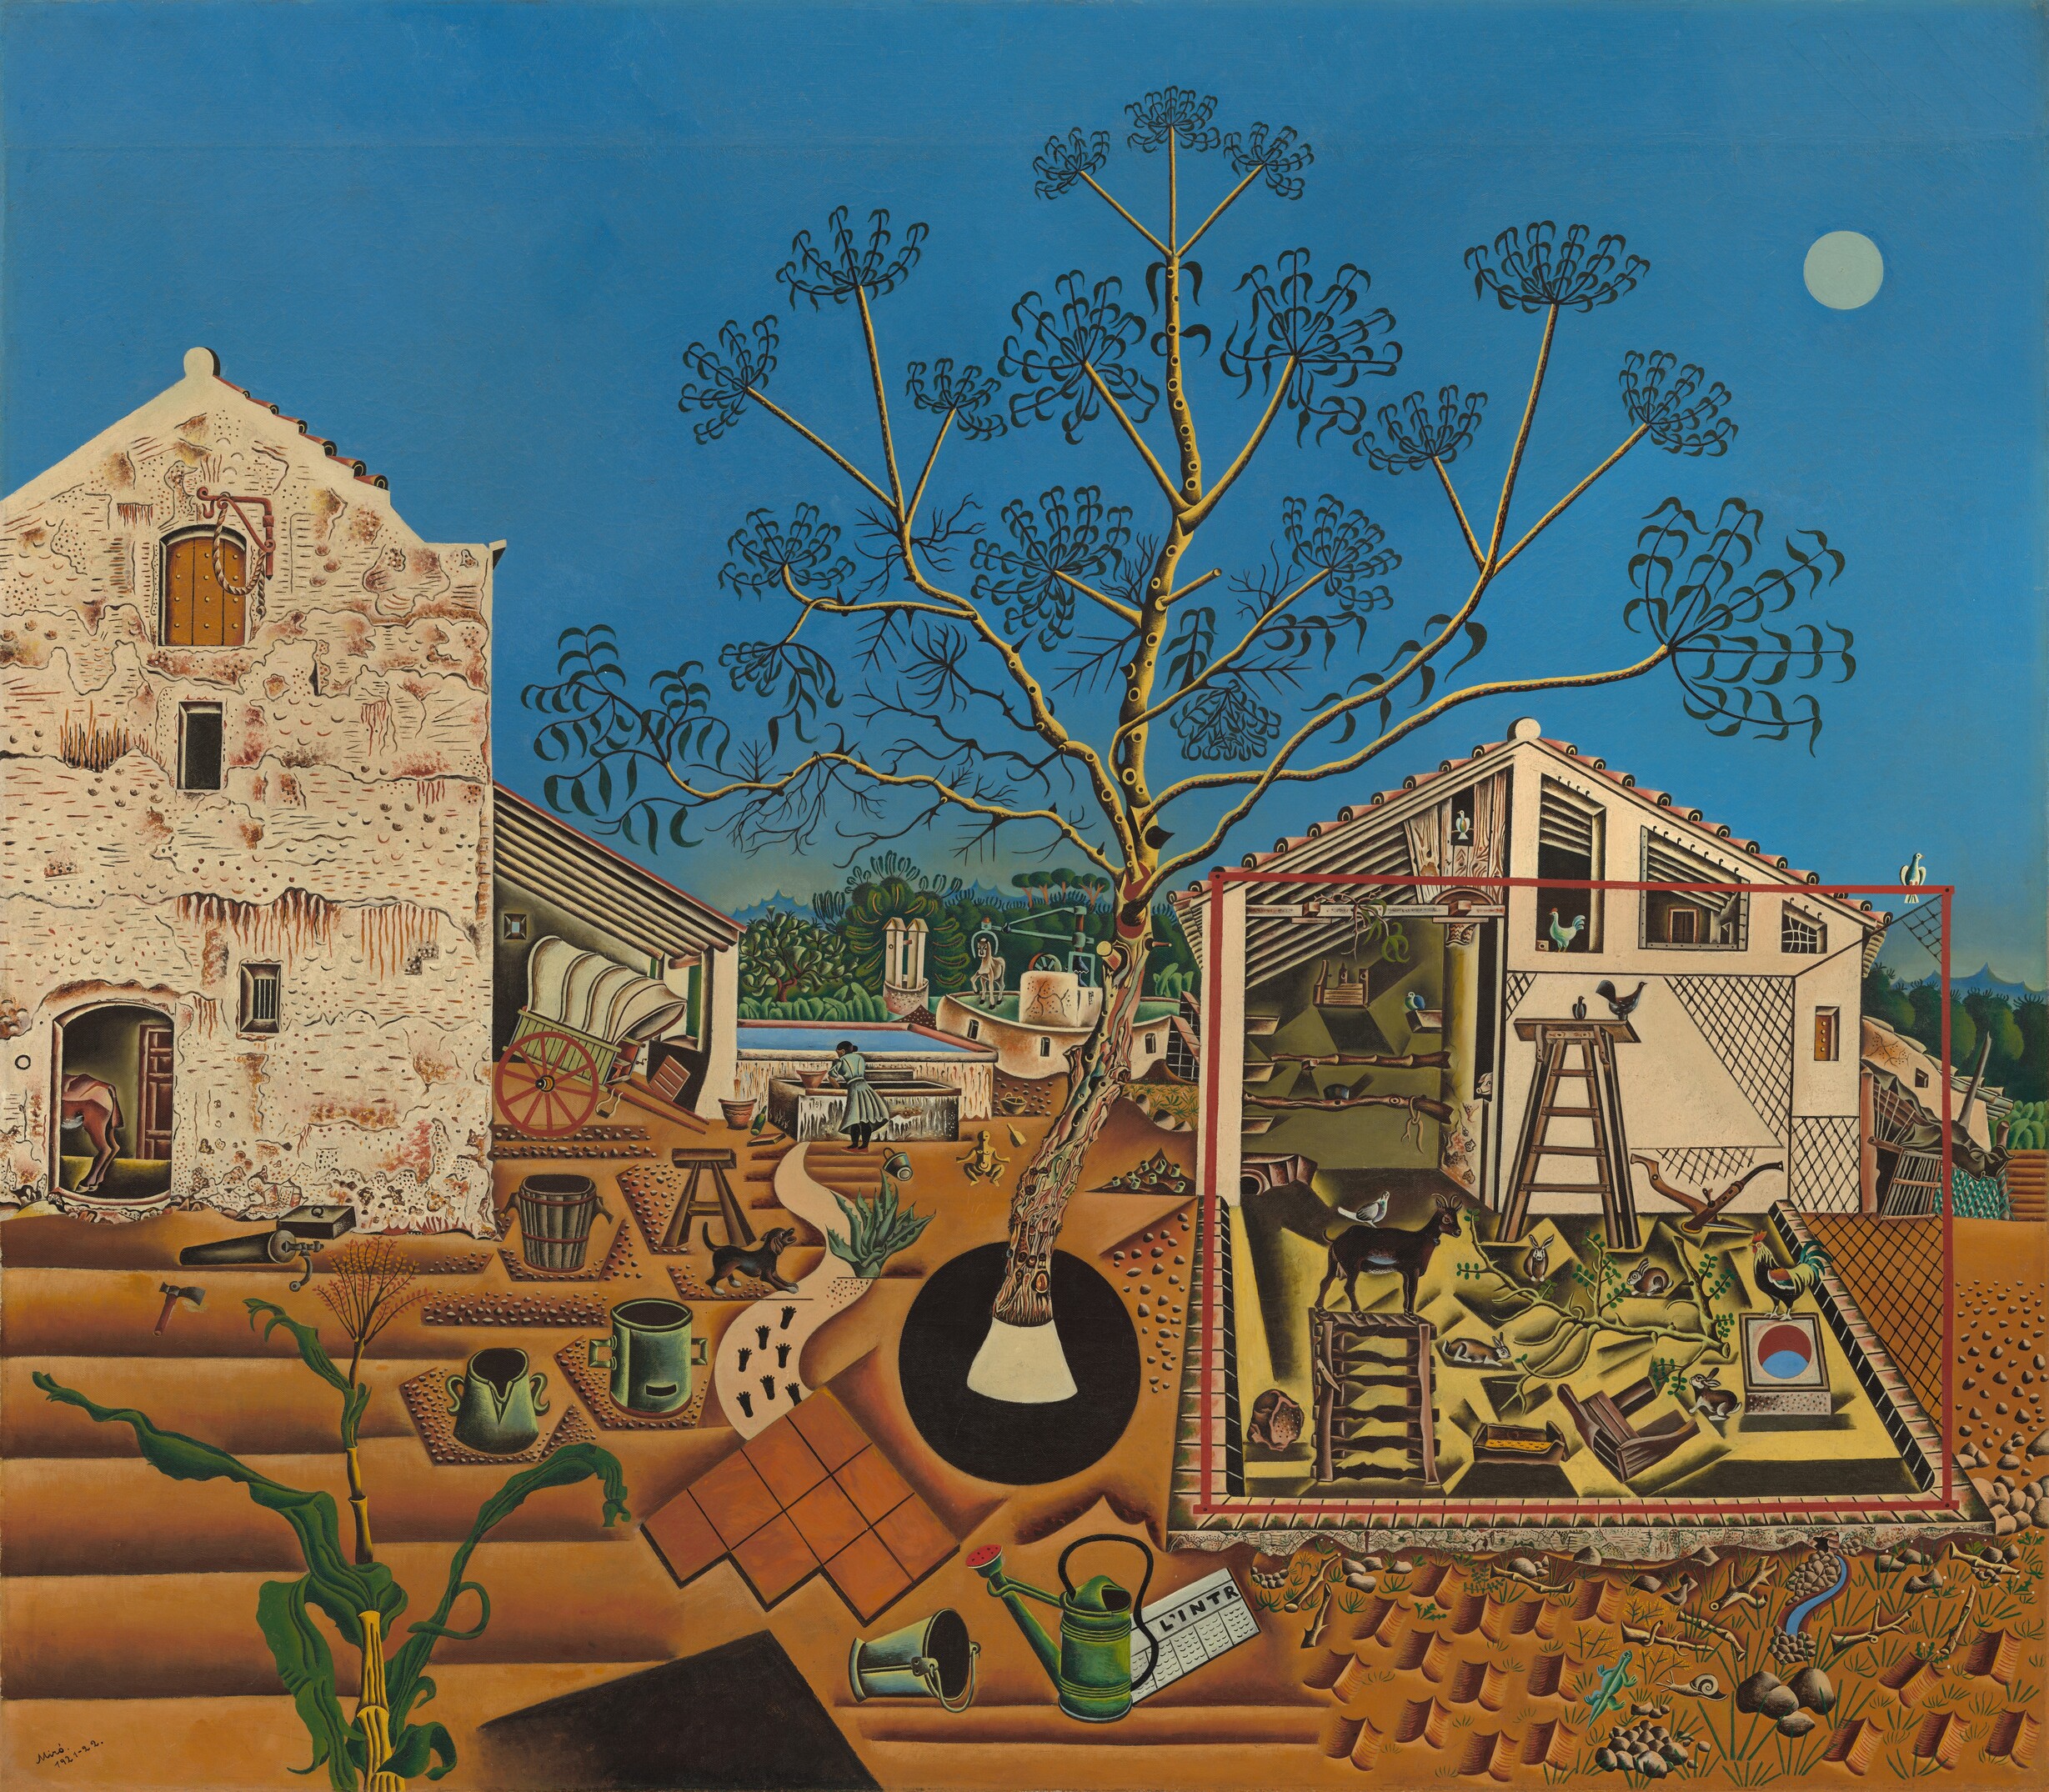 An image of Juan Miró's painting of his family's Catalonian farm. The image shows two farm buildings, a farmyard, and a tree against red earth and blue sky.